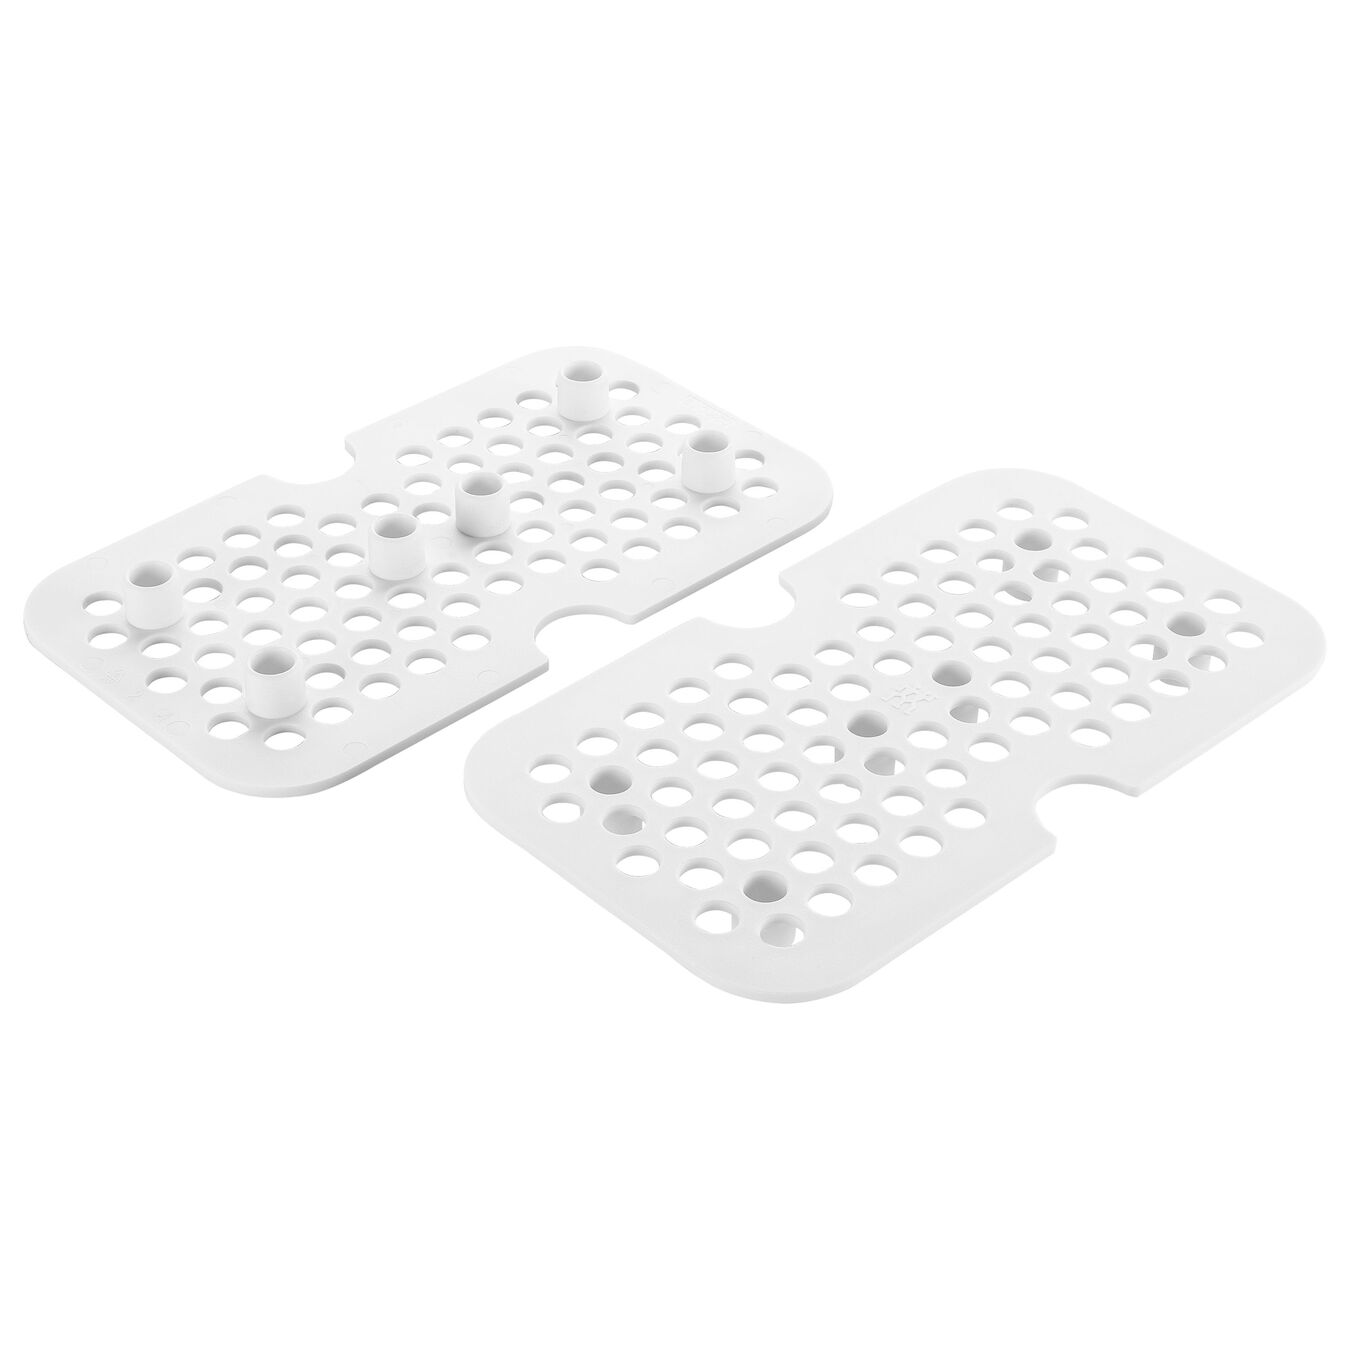 Vacuum accessory set drip tray for glass boxes, medium/large / 2-pc,,large 3